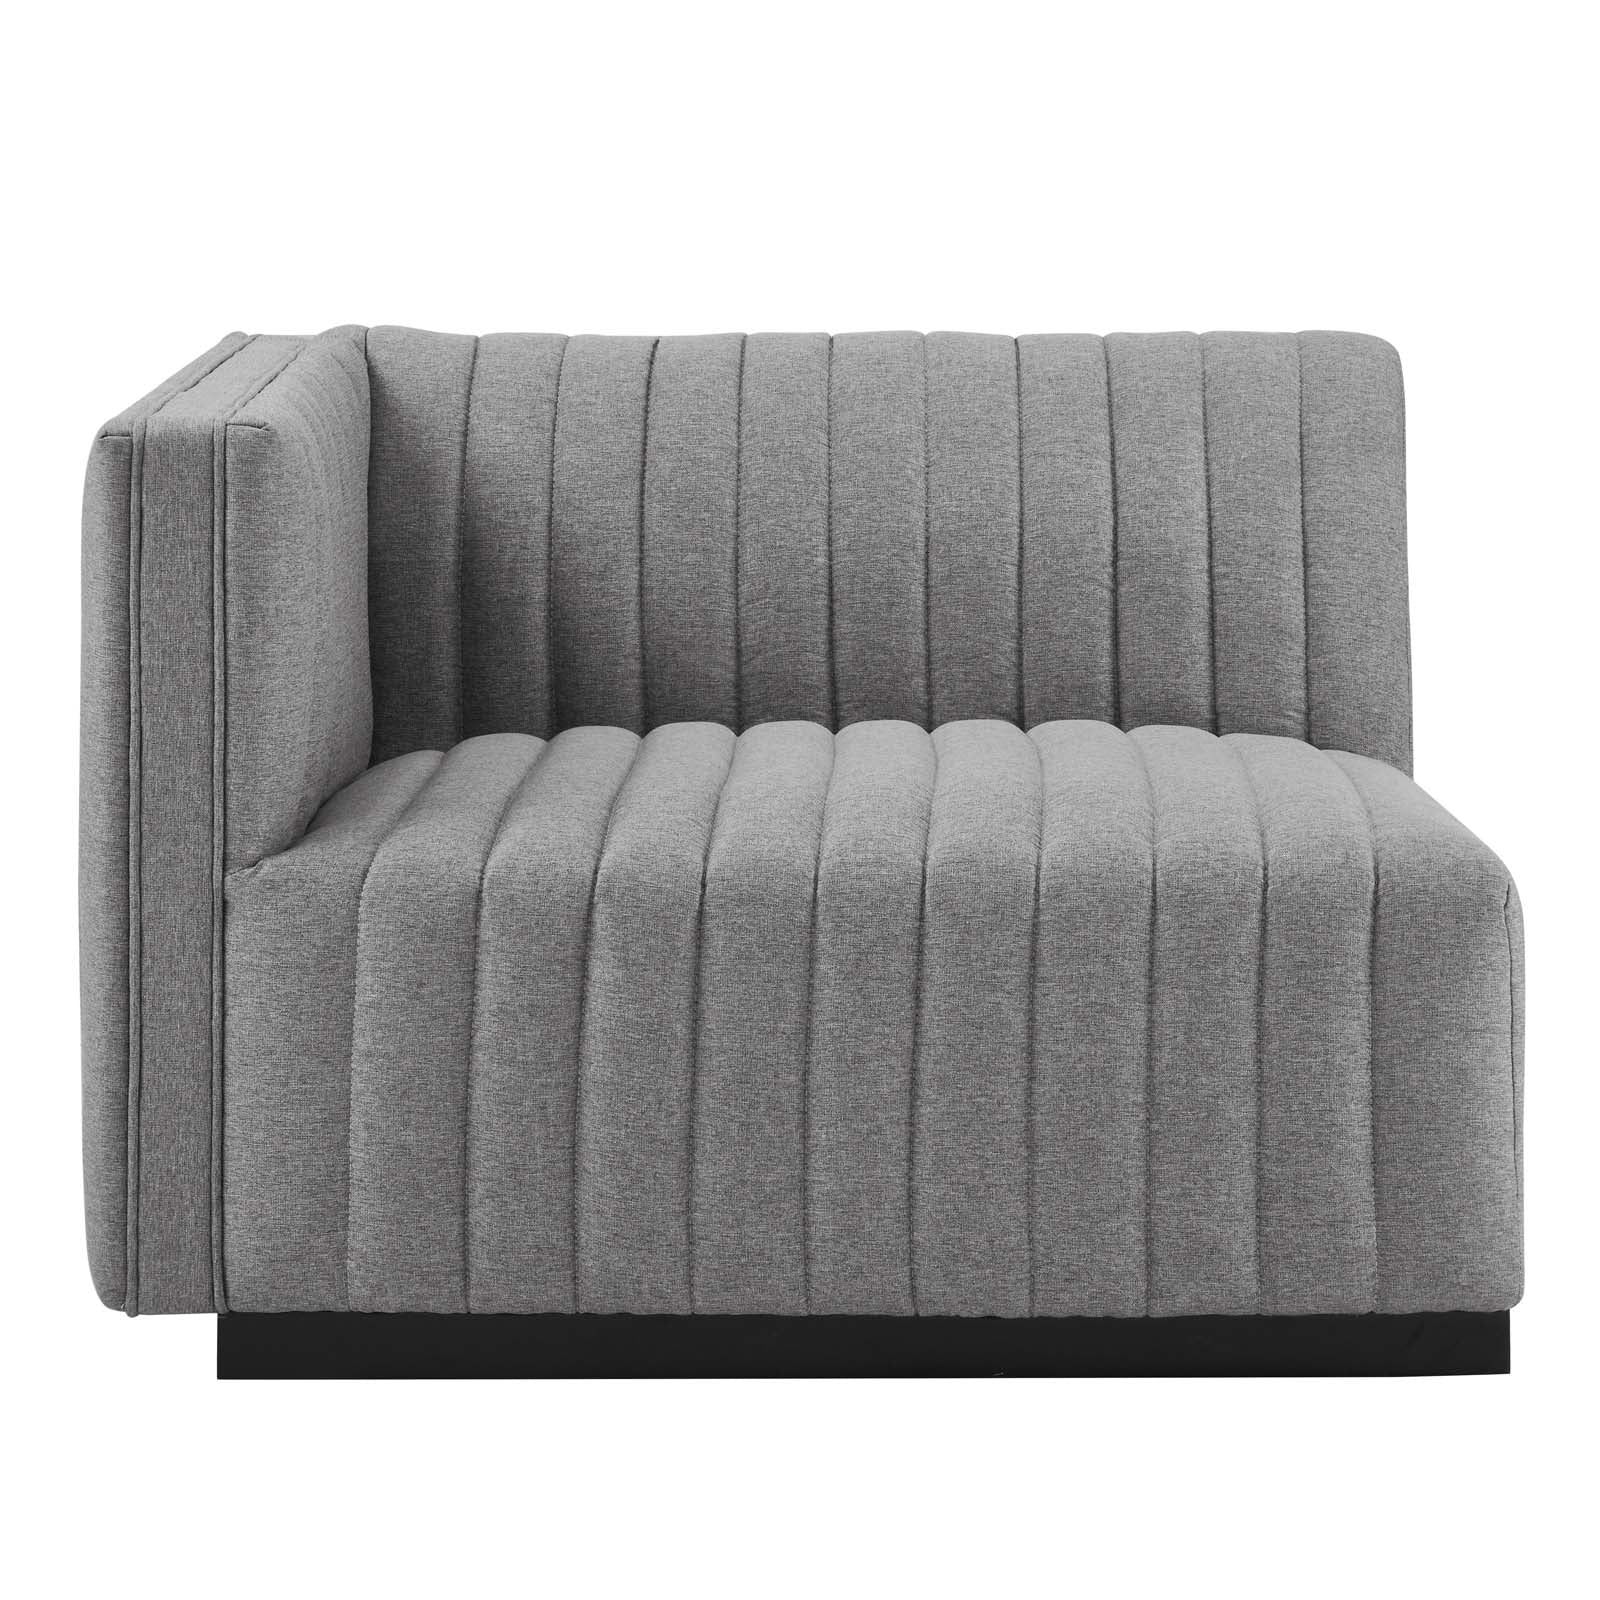 Modway Sectional Sofas - Conjure Channel Tufted Upholstered Fabric 5-Piece Sectional Black Light Gray